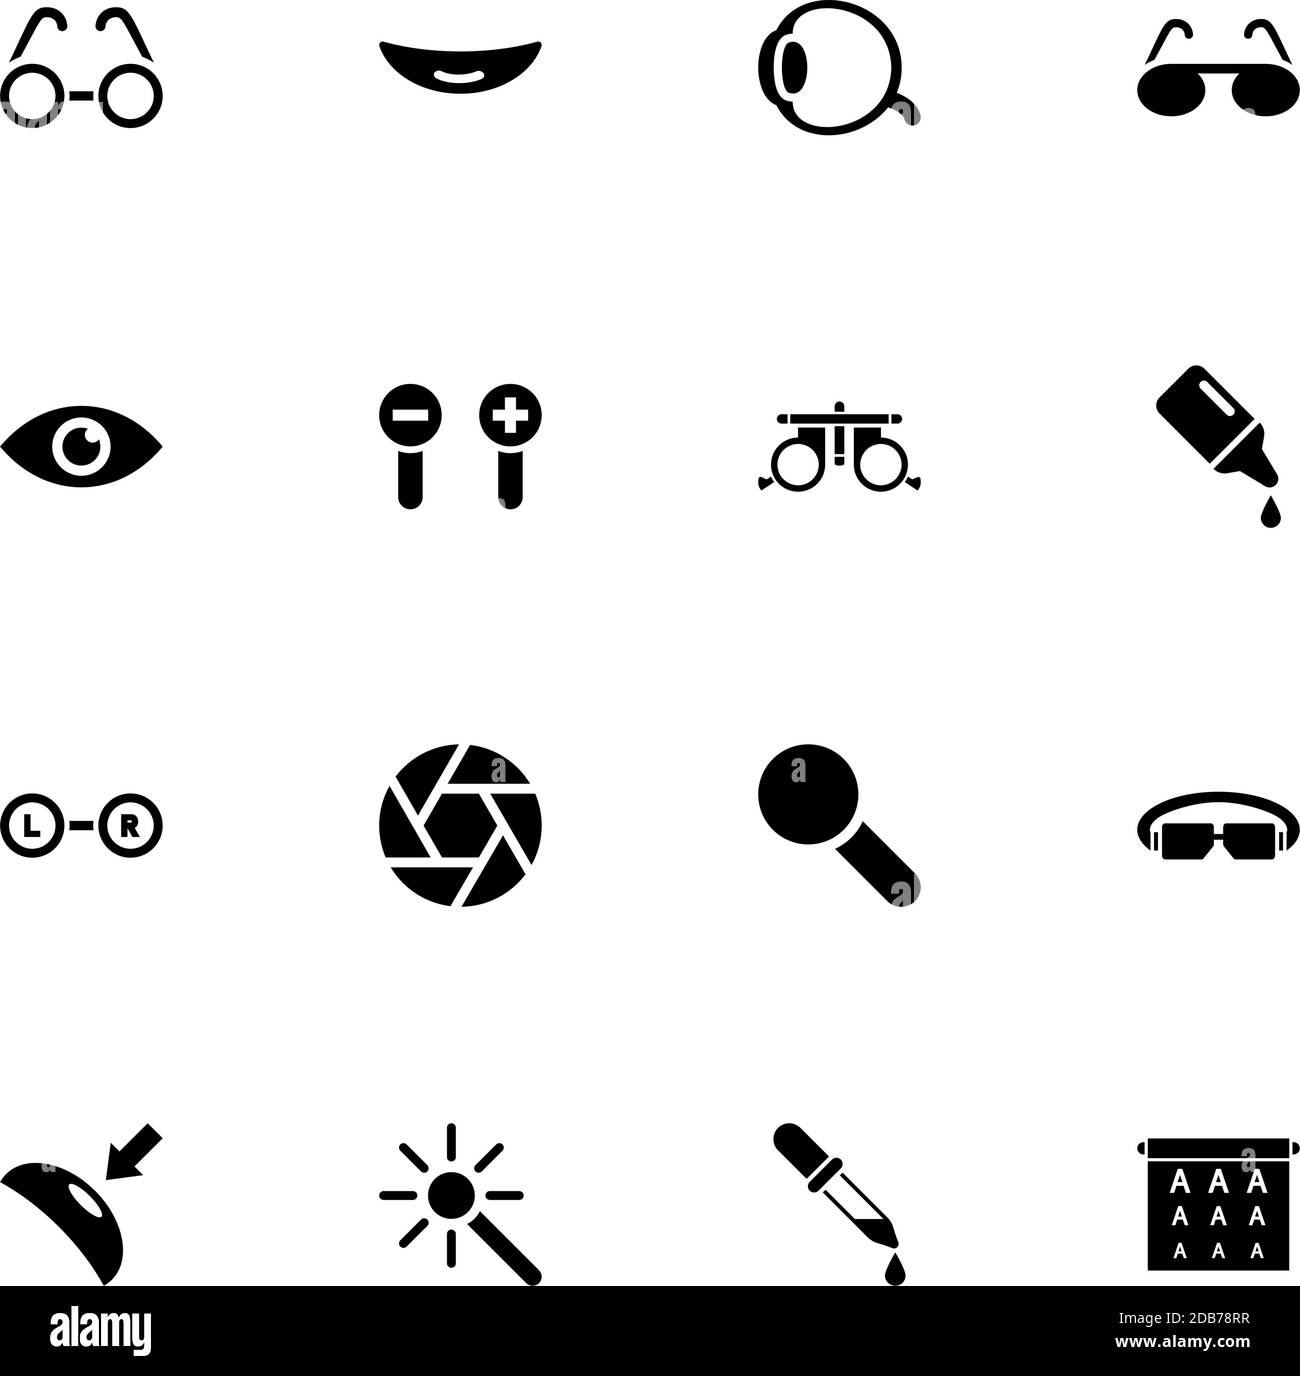 Optometry icon - Expand to any size - Change to any colour. Perfect Flat Vector Contains such Icons as trial lens, glasses, eye drops, pipette dropper Stock Vector